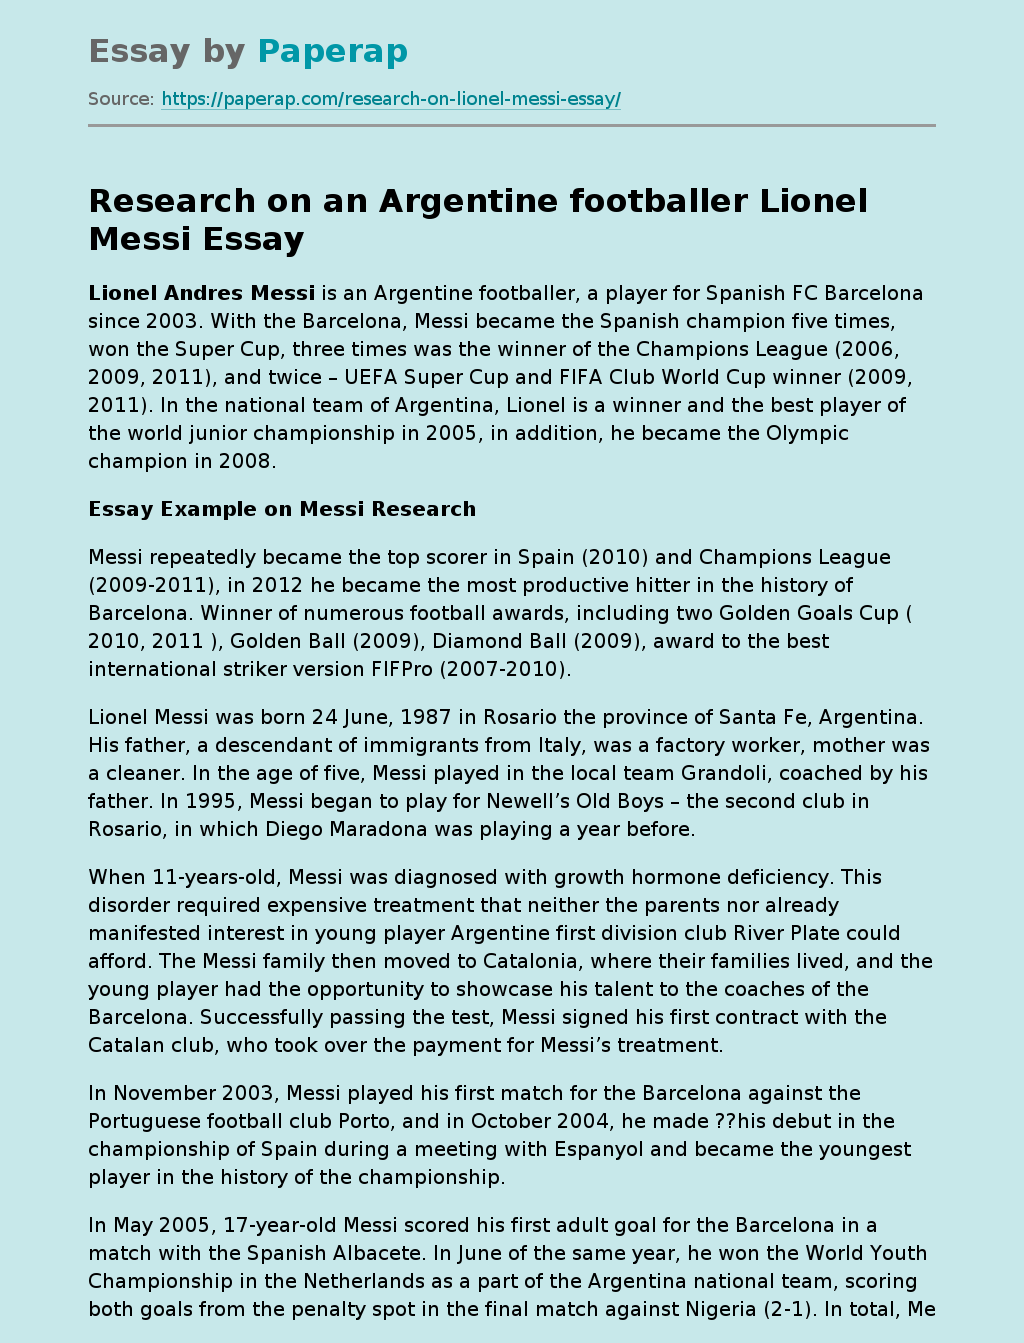 Research on an Argentine footballer Lionel Messi